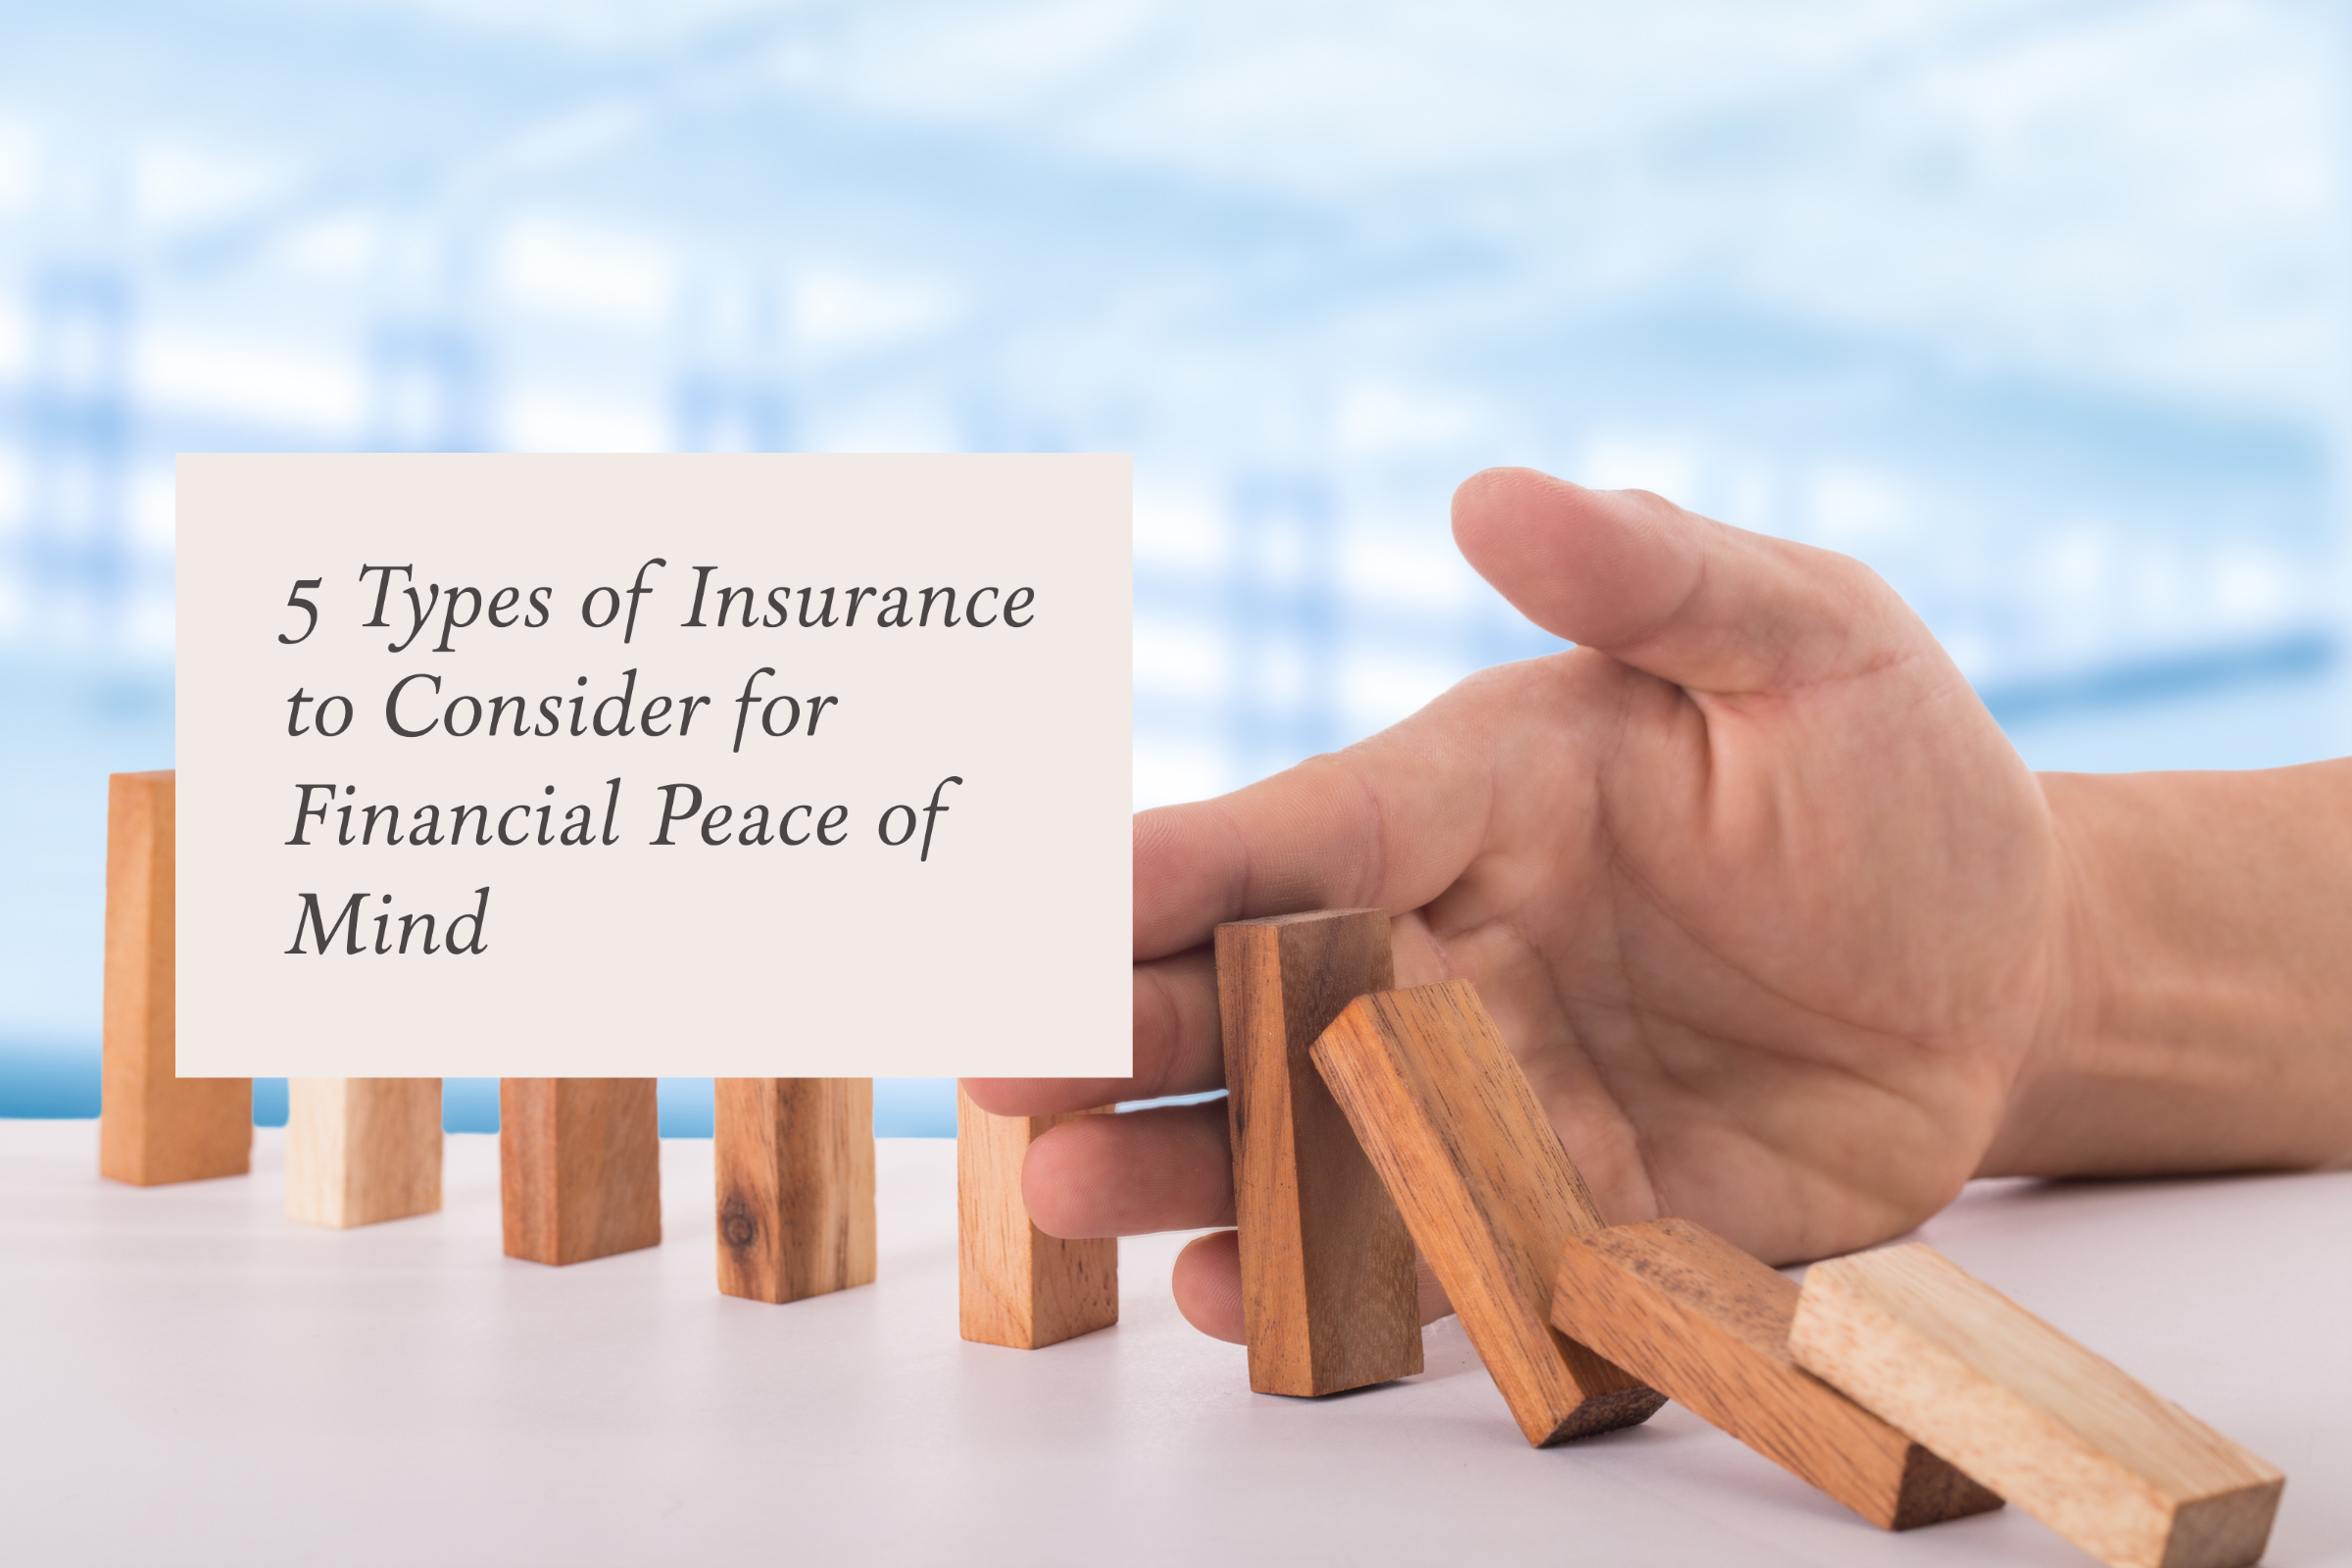 5 Types of Insurance to Consider for Financial Peace of Mind